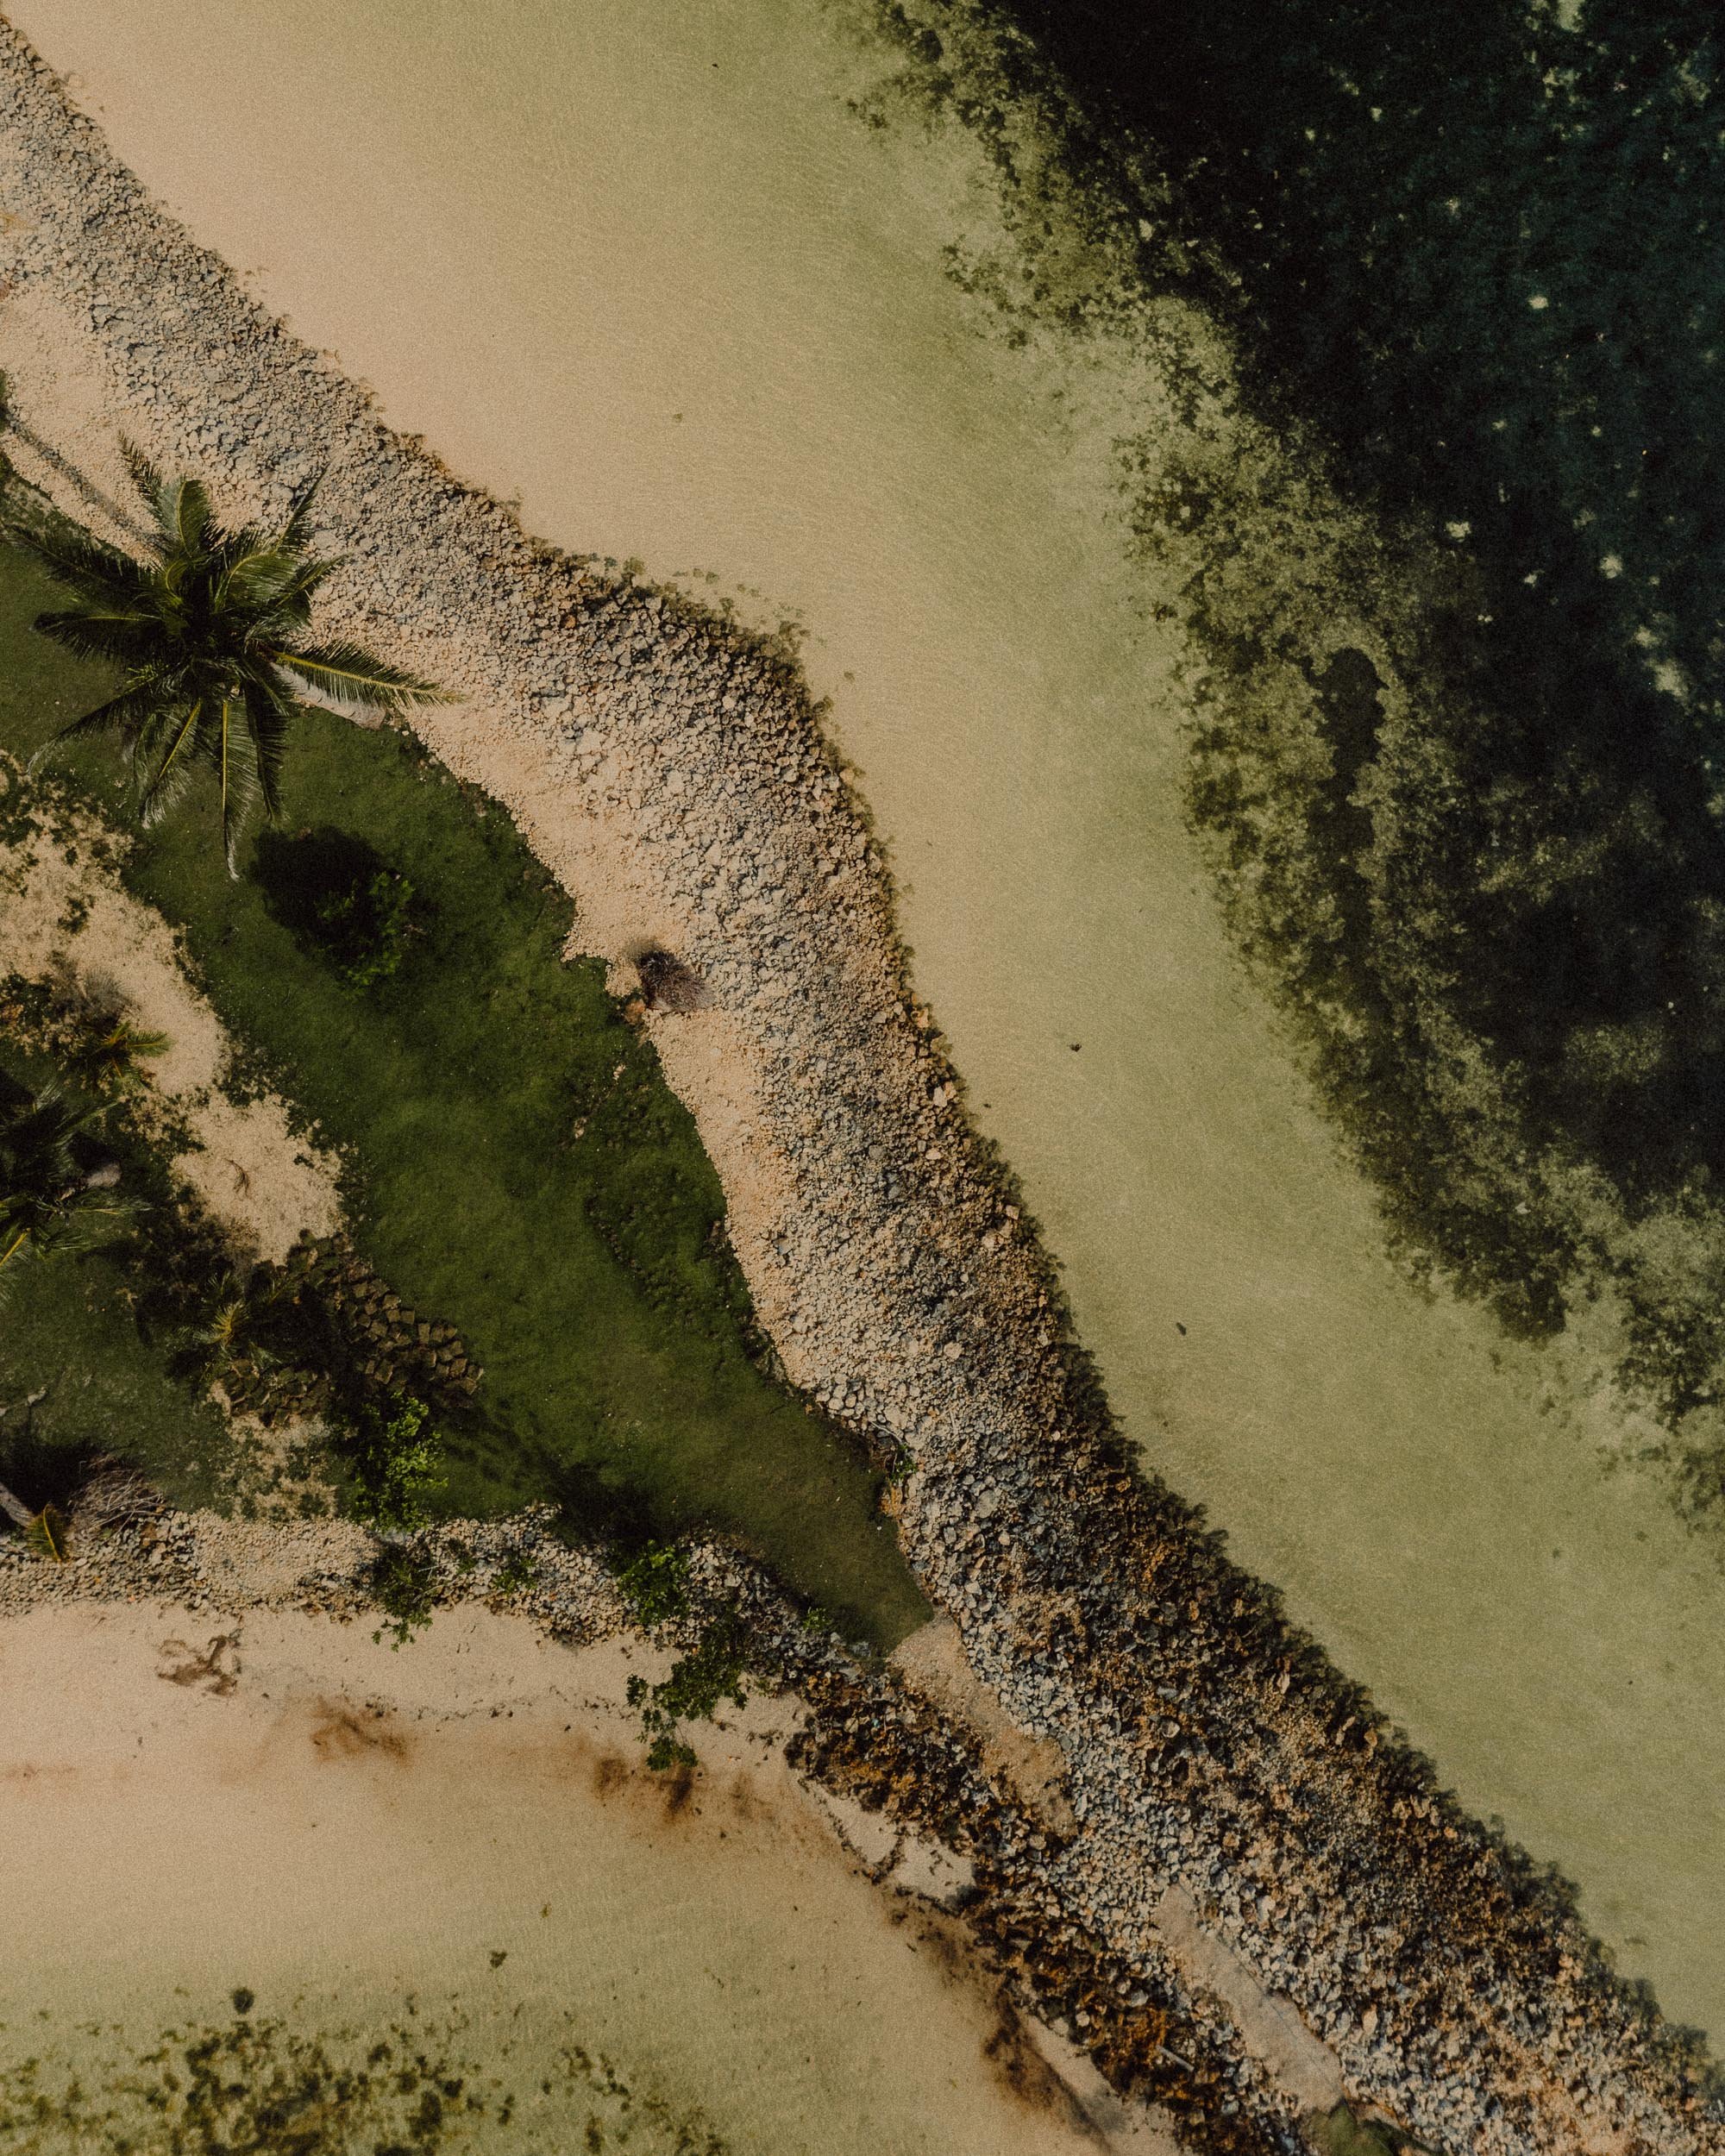 13-Siargao Drone Photography-A bird's-eye view aerial photo of Malinao Paradise, Siargao, Philippines, Southeast Asia, April 2022, Mavic 2 Pro, Hasselblad L1D-20c.jpg